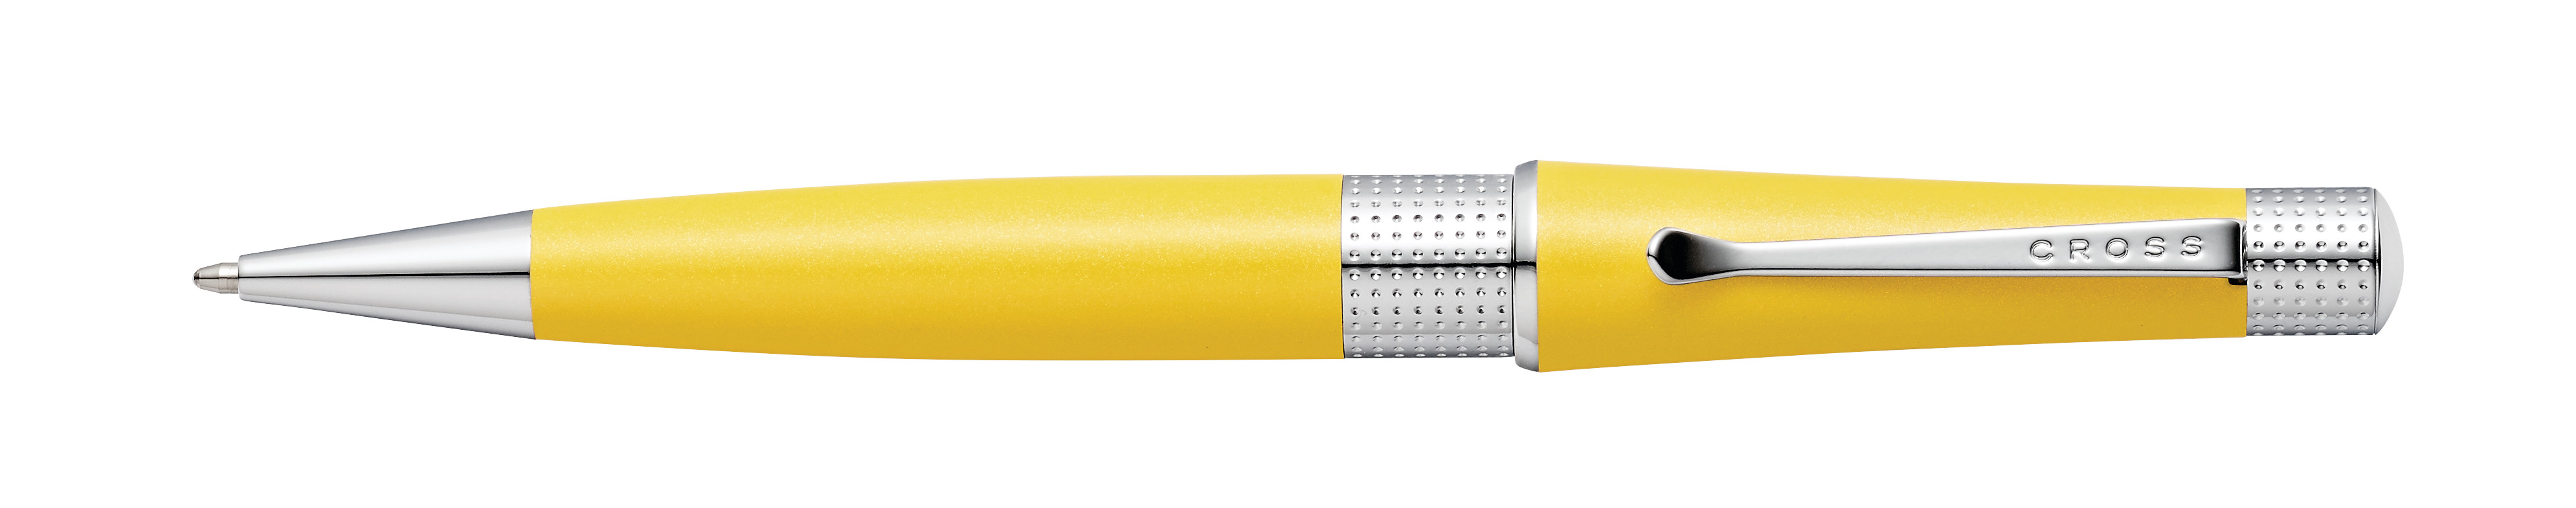 AT0492-20 CROSS BEVERLY SUNRISE YELLOW PEARLESCENT LACQUER BALLPOINT PEN BOXED 